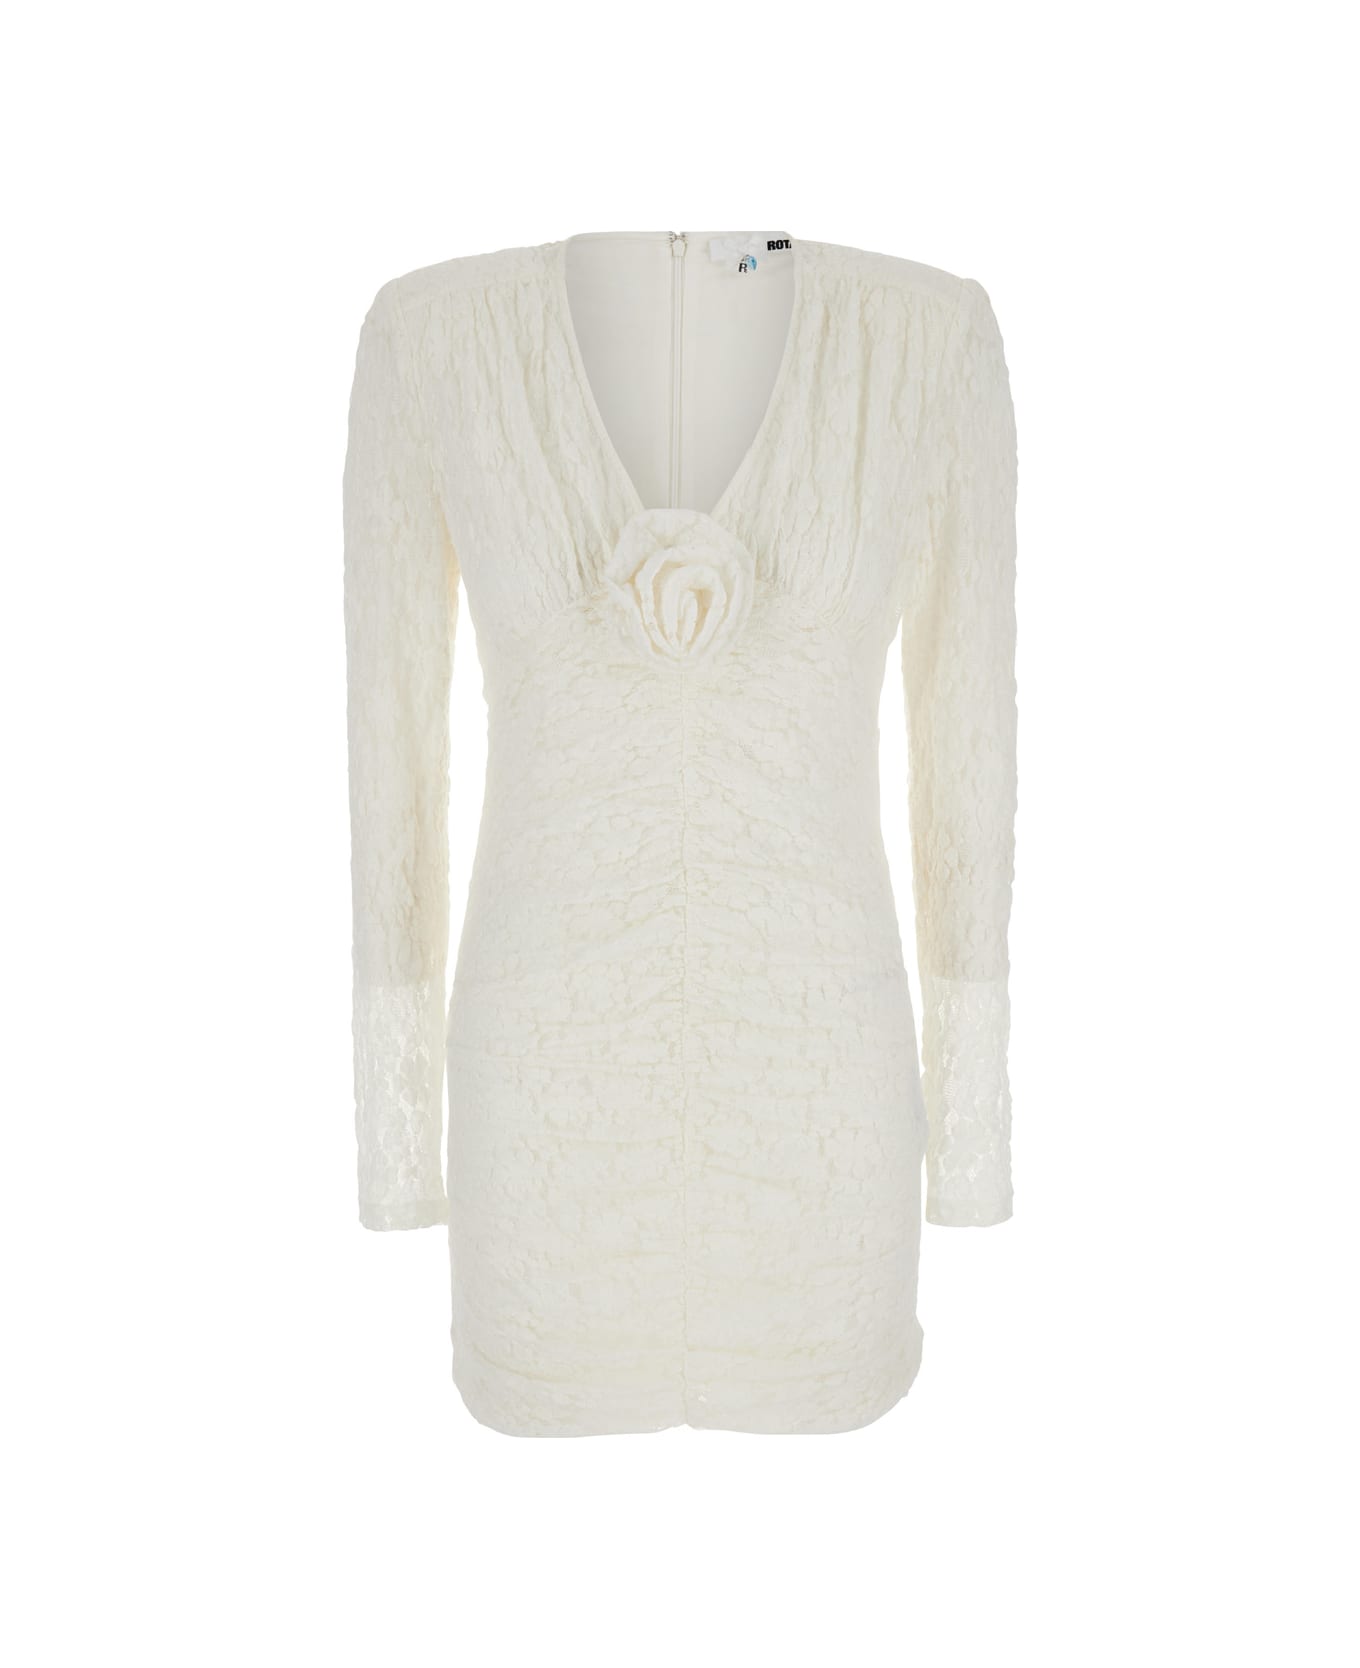 Rotate by Birger Christensen Mini White Dress With Rose Patch In Lace Woman - White ワンピース＆ドレス